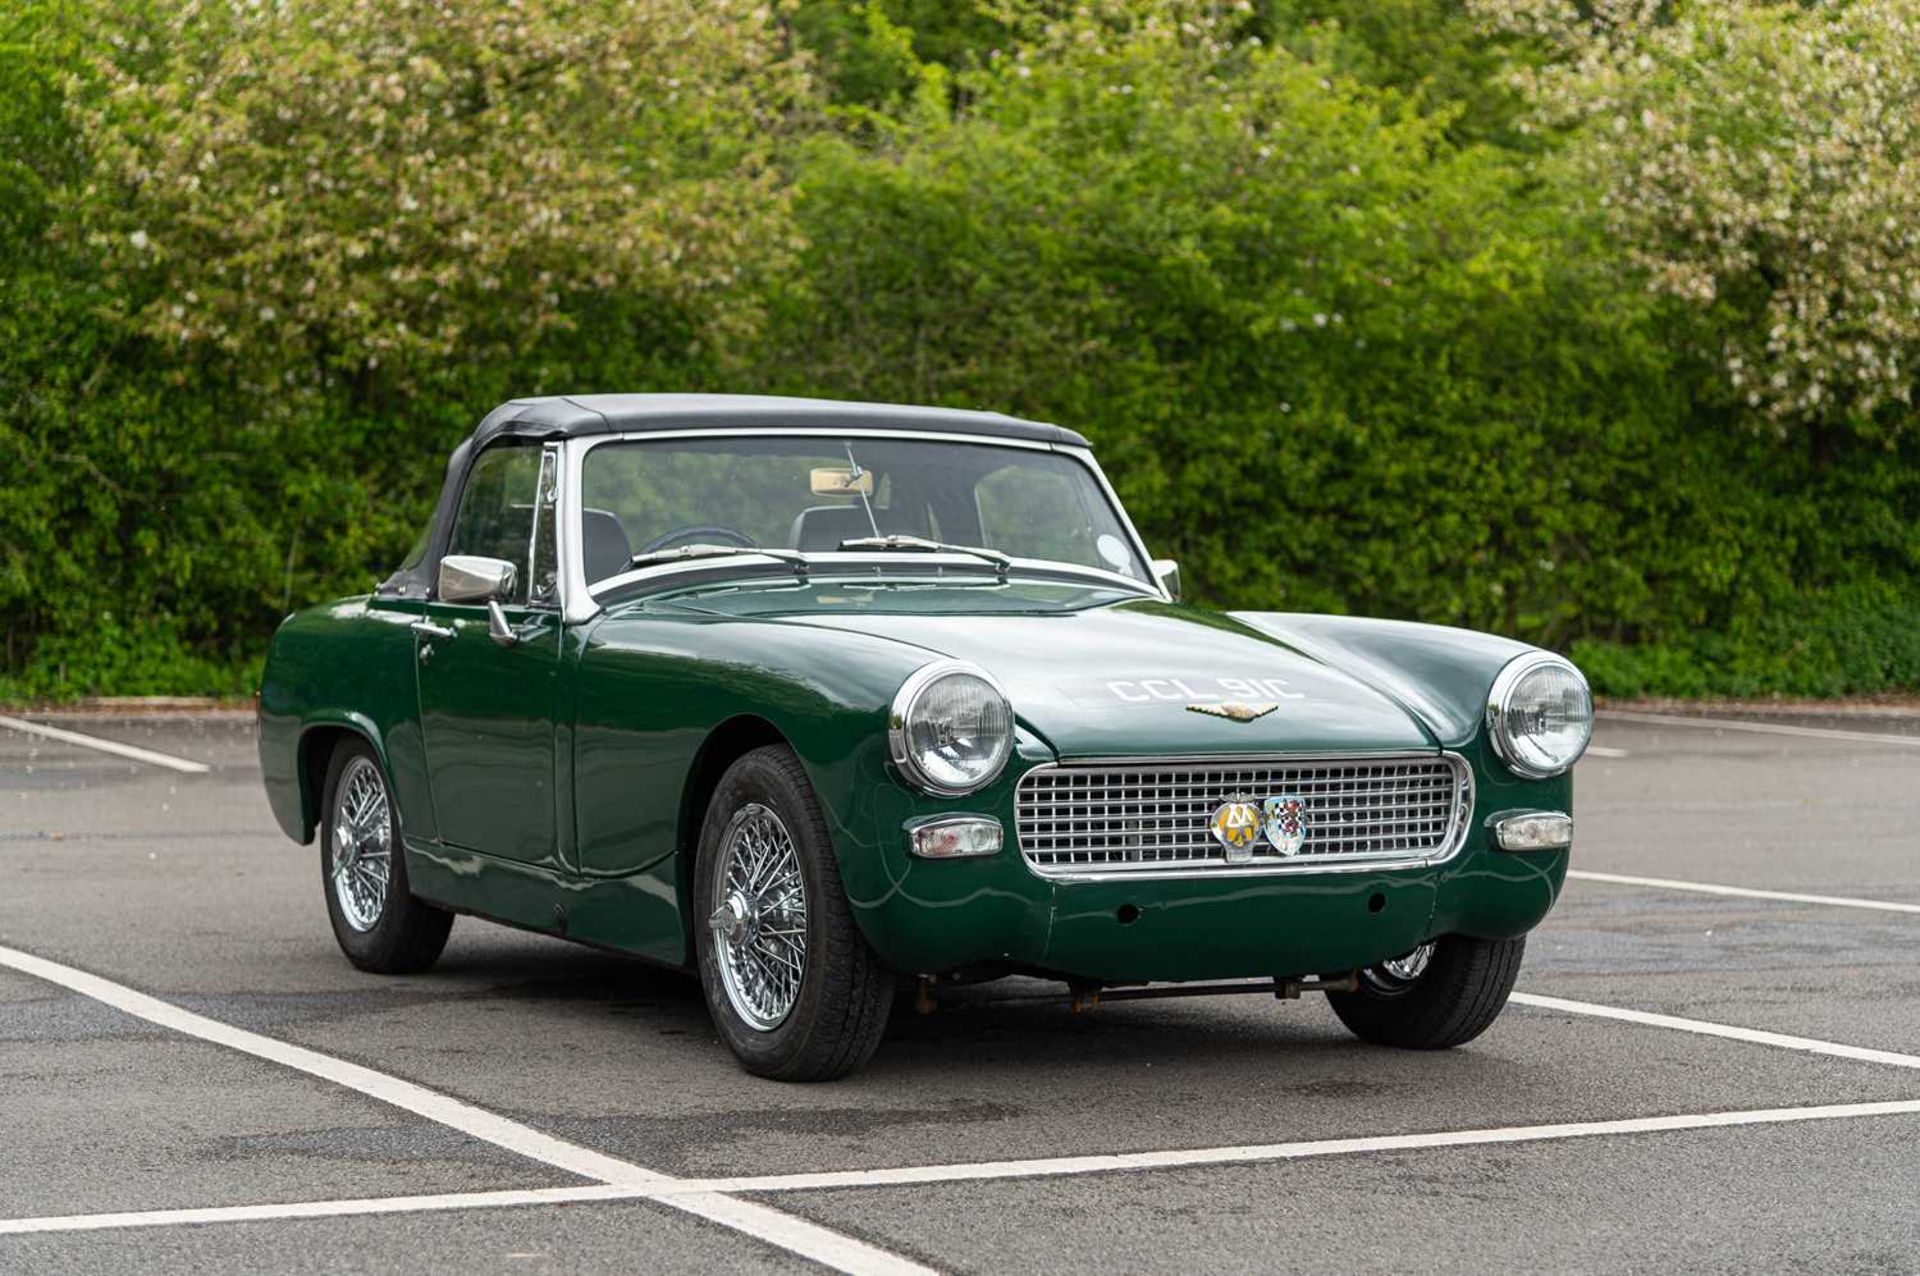 1965 Austin-Healey Sprite Formerly the property of British Formula One racing driver David Piper - Image 12 of 71